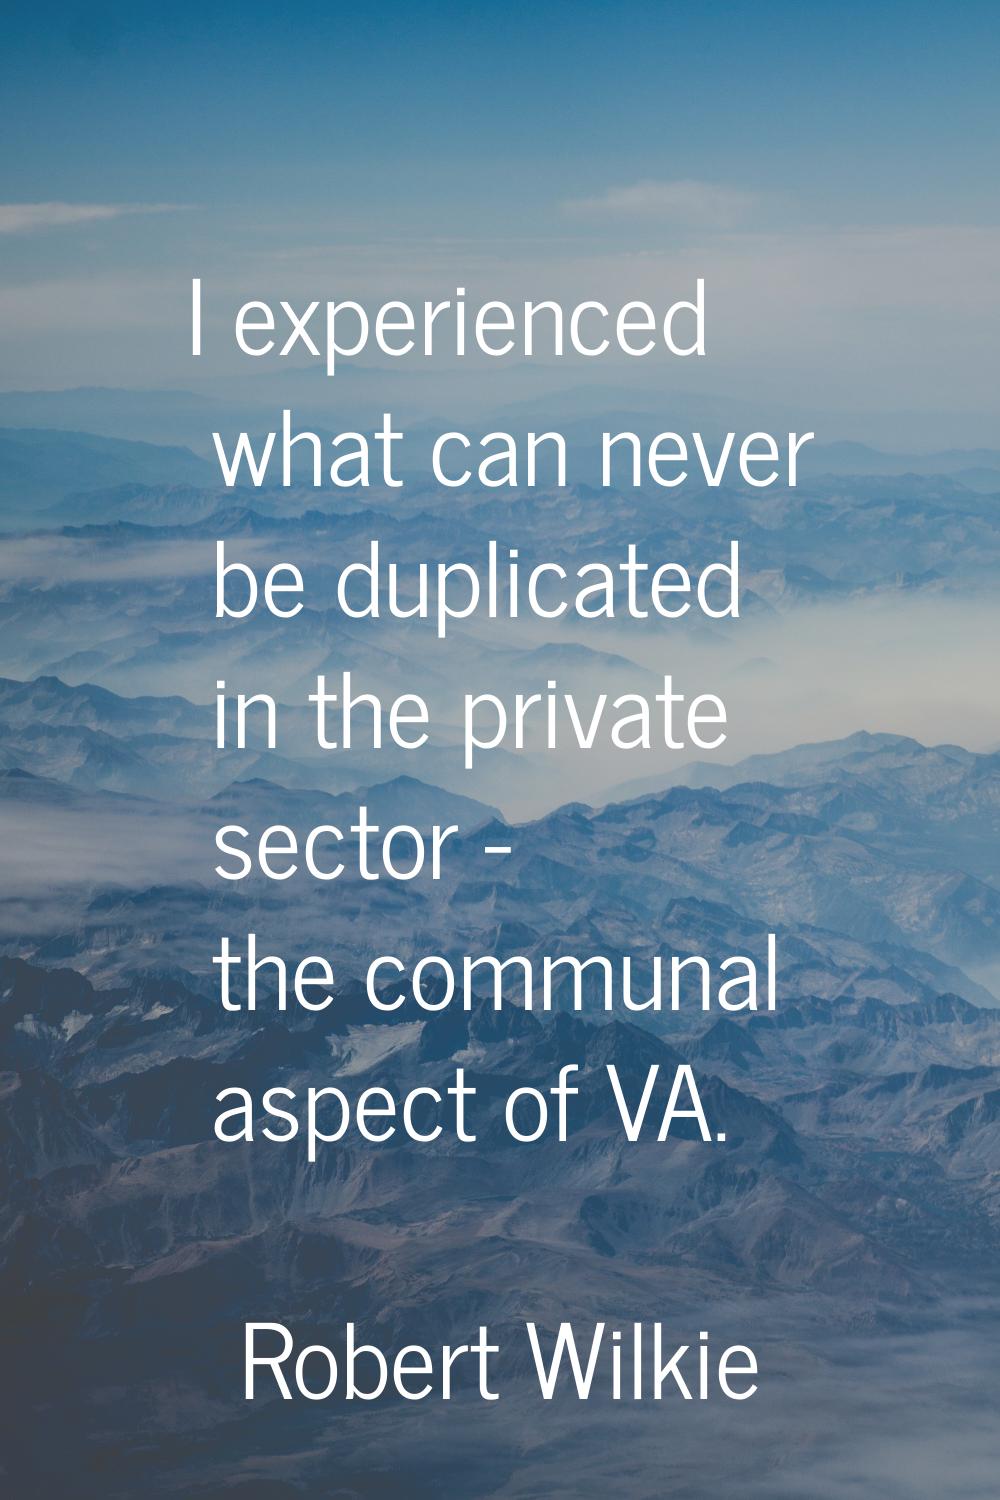 I experienced what can never be duplicated in the private sector - the communal aspect of VA.